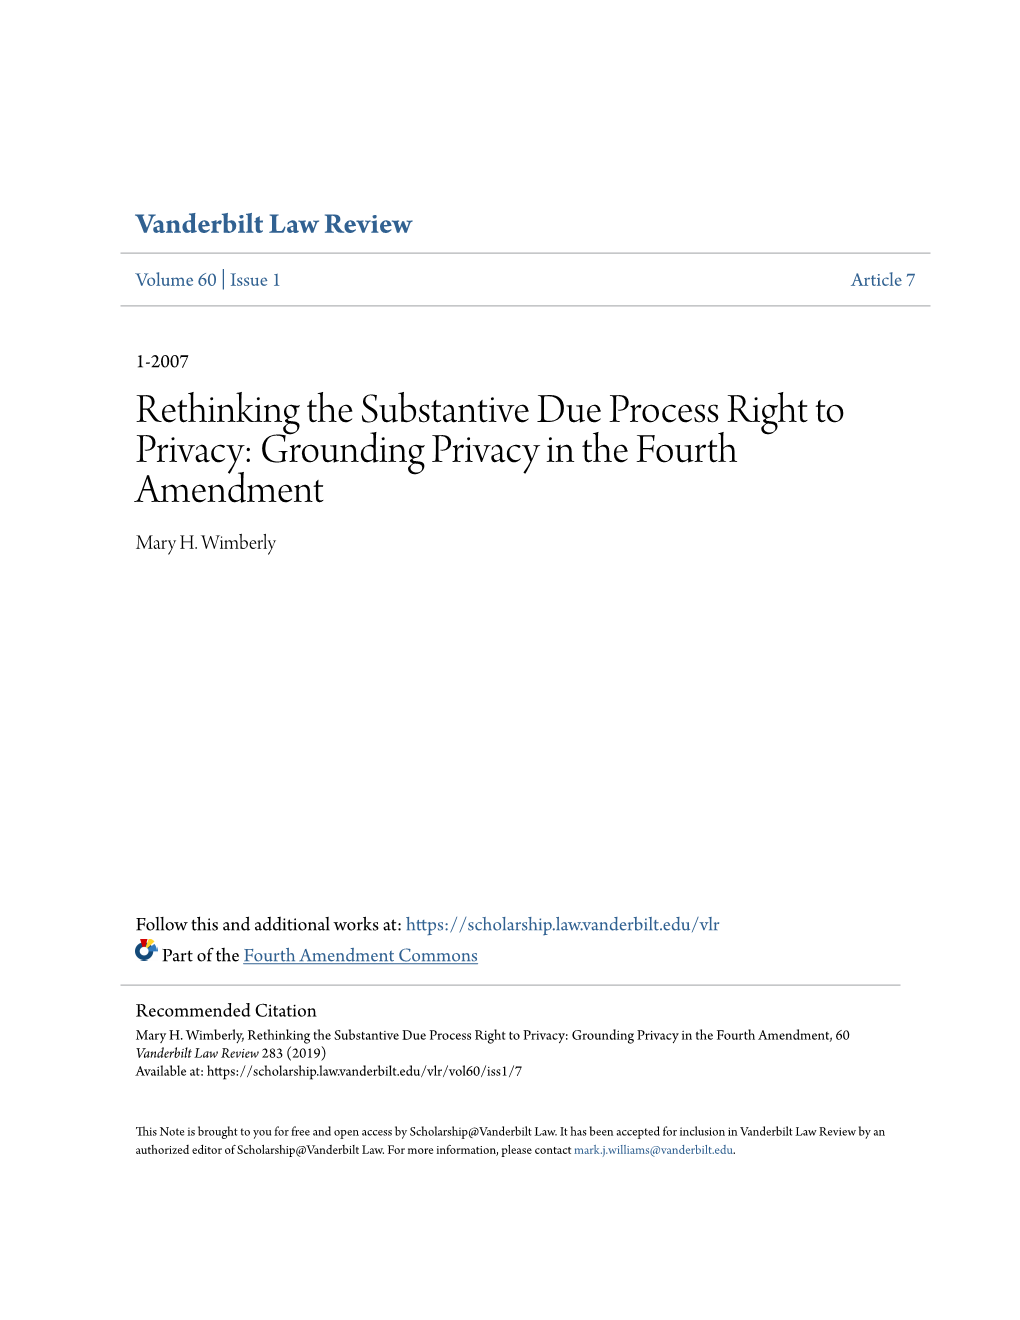 Rethinking the Substantive Due Process Right to Privacy: Grounding Privacy in the Fourth Amendment Mary H